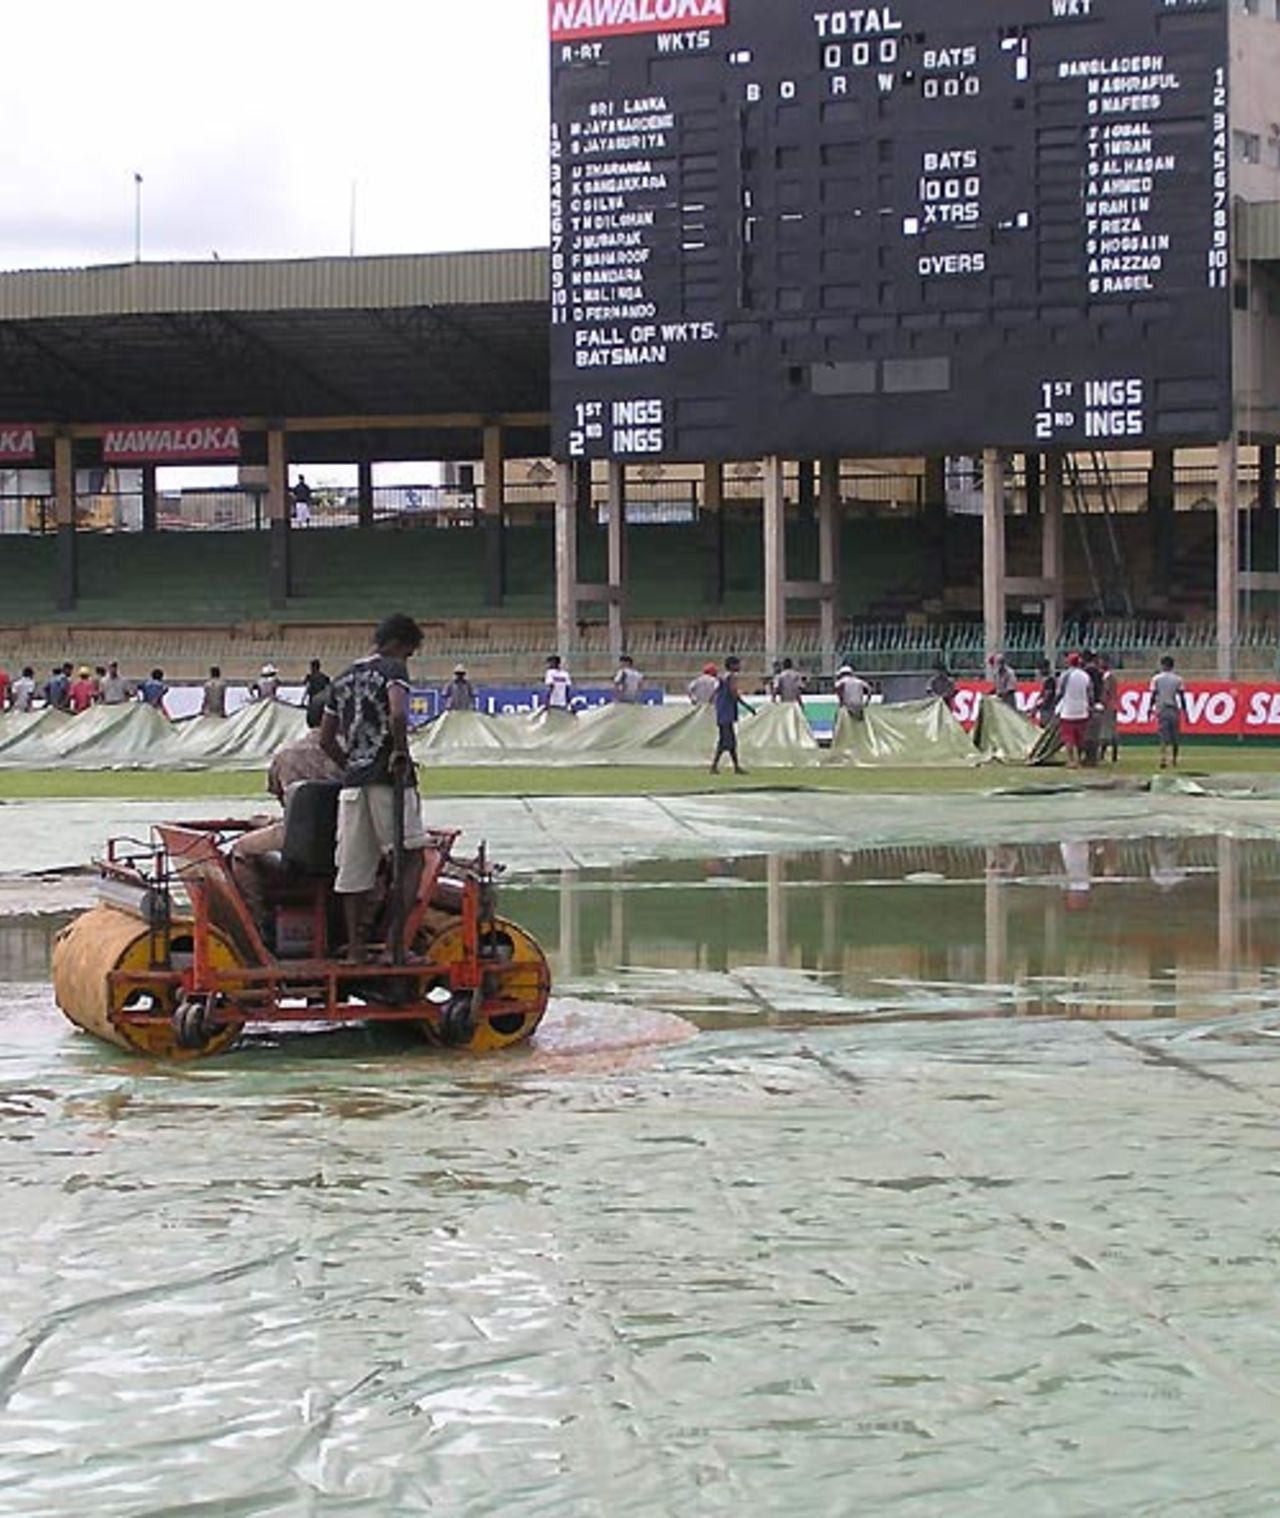 The ground staff at the Premadasa stadium try to clear the wet outfield, Sri Lanka v Bangladesh, 3rd ODI, Colombo, July 25, 2007